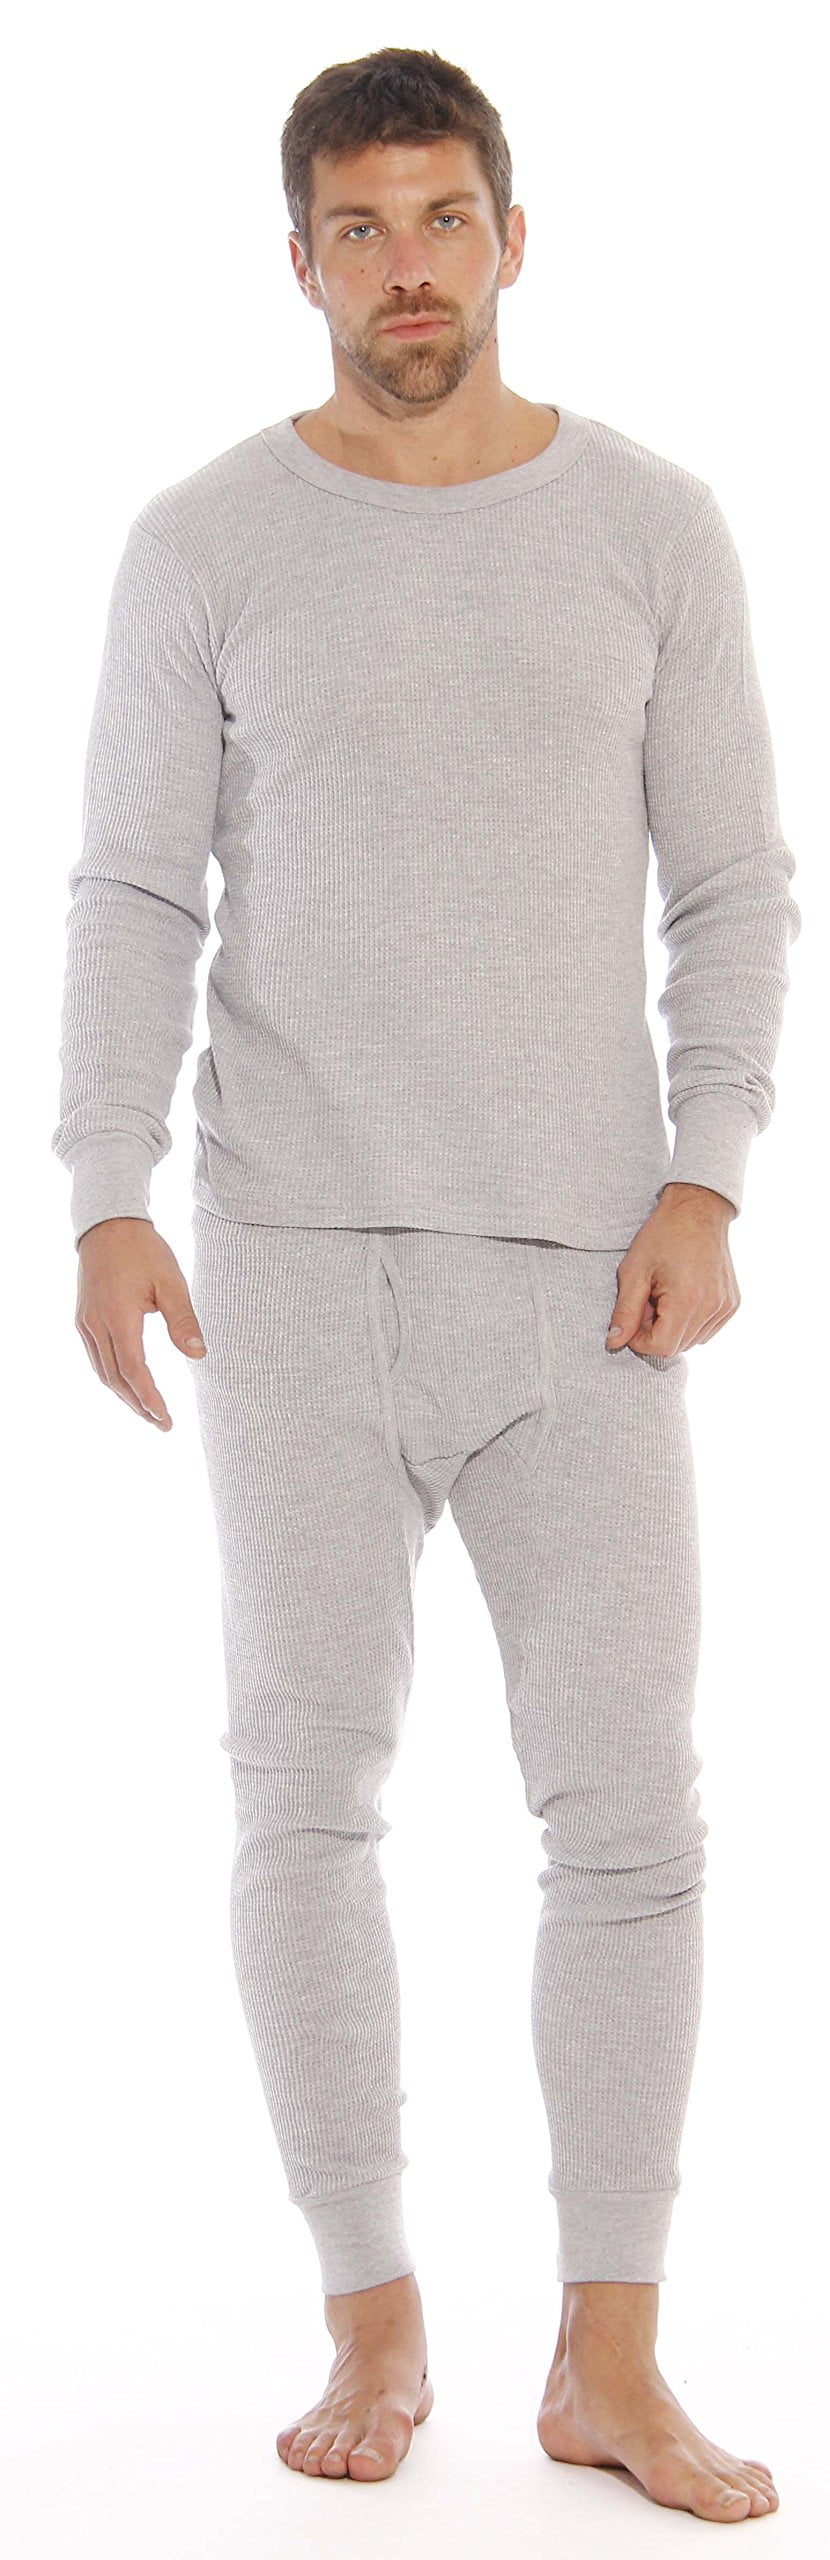 At The Buzzer Thermal Underwear Set for Men 